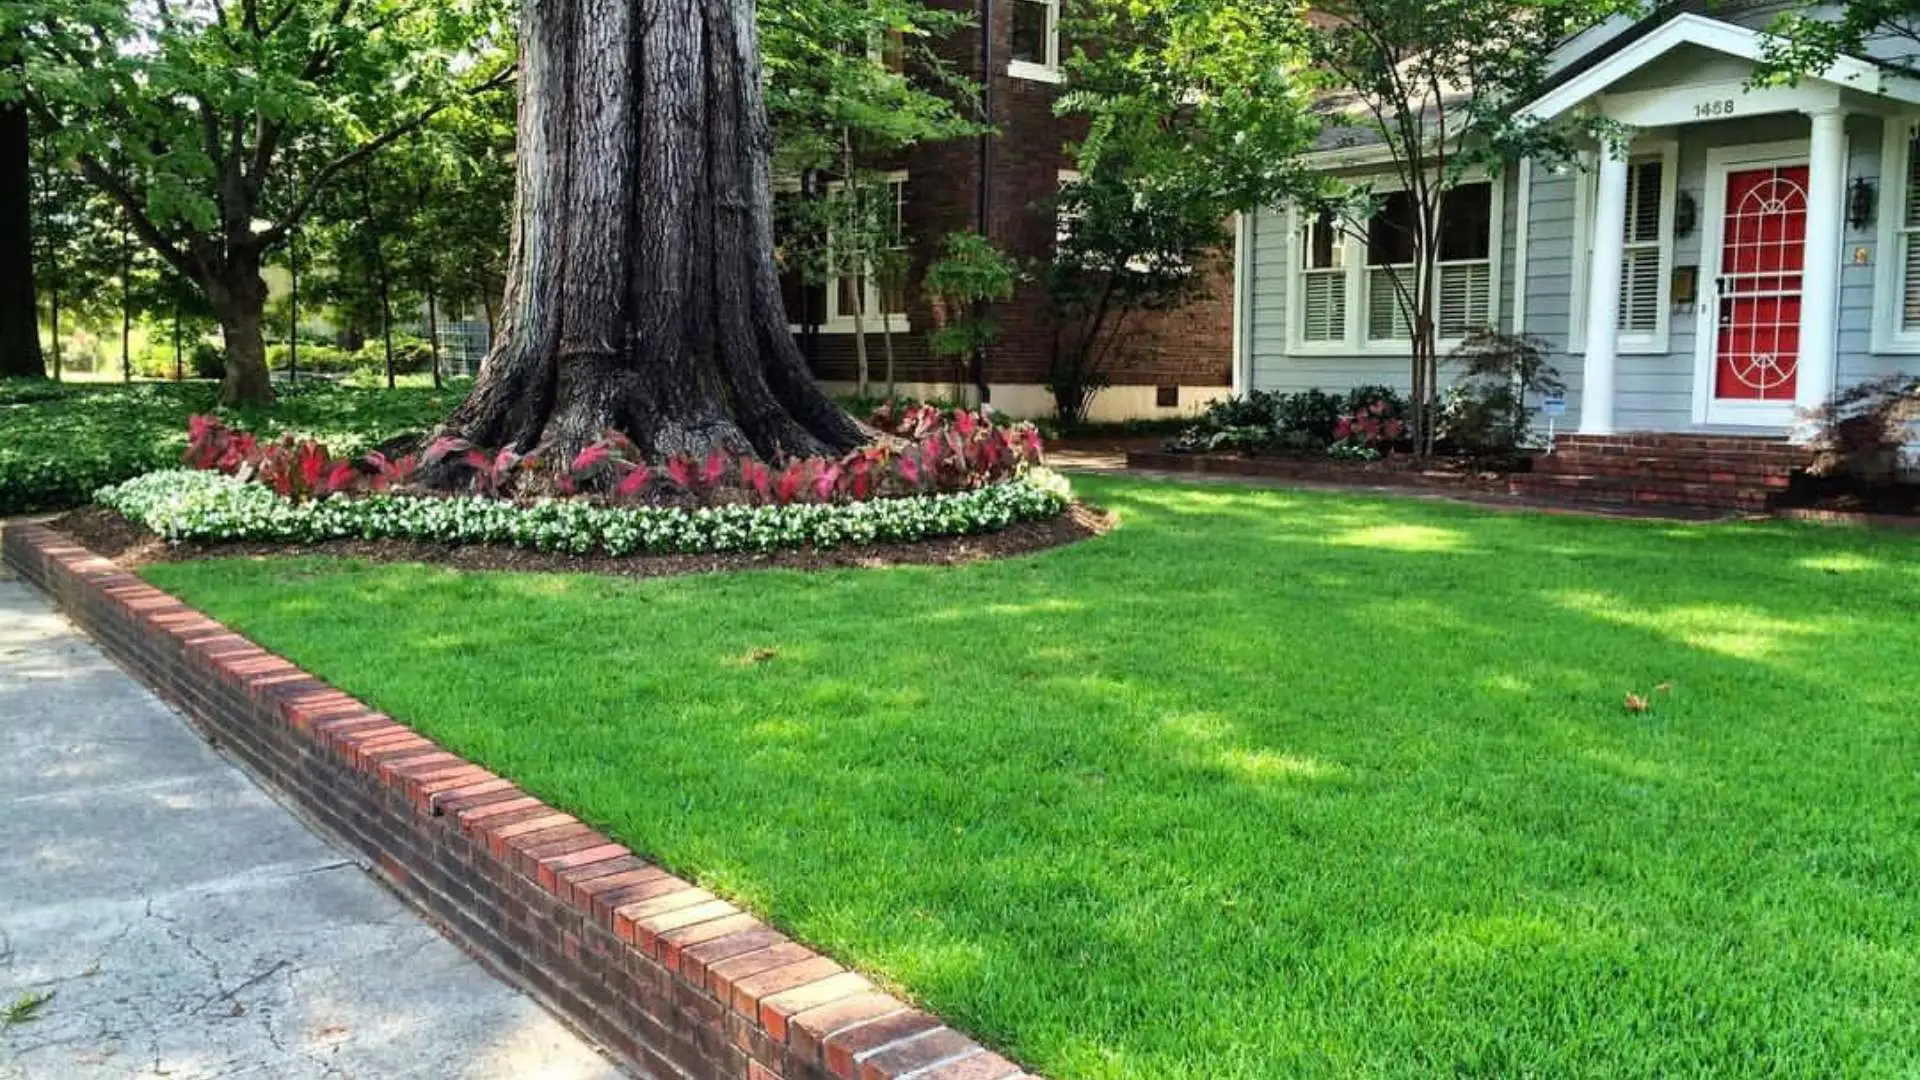 Vibrant lawn with landscape bed around tree in Downtown Memphis, TN.